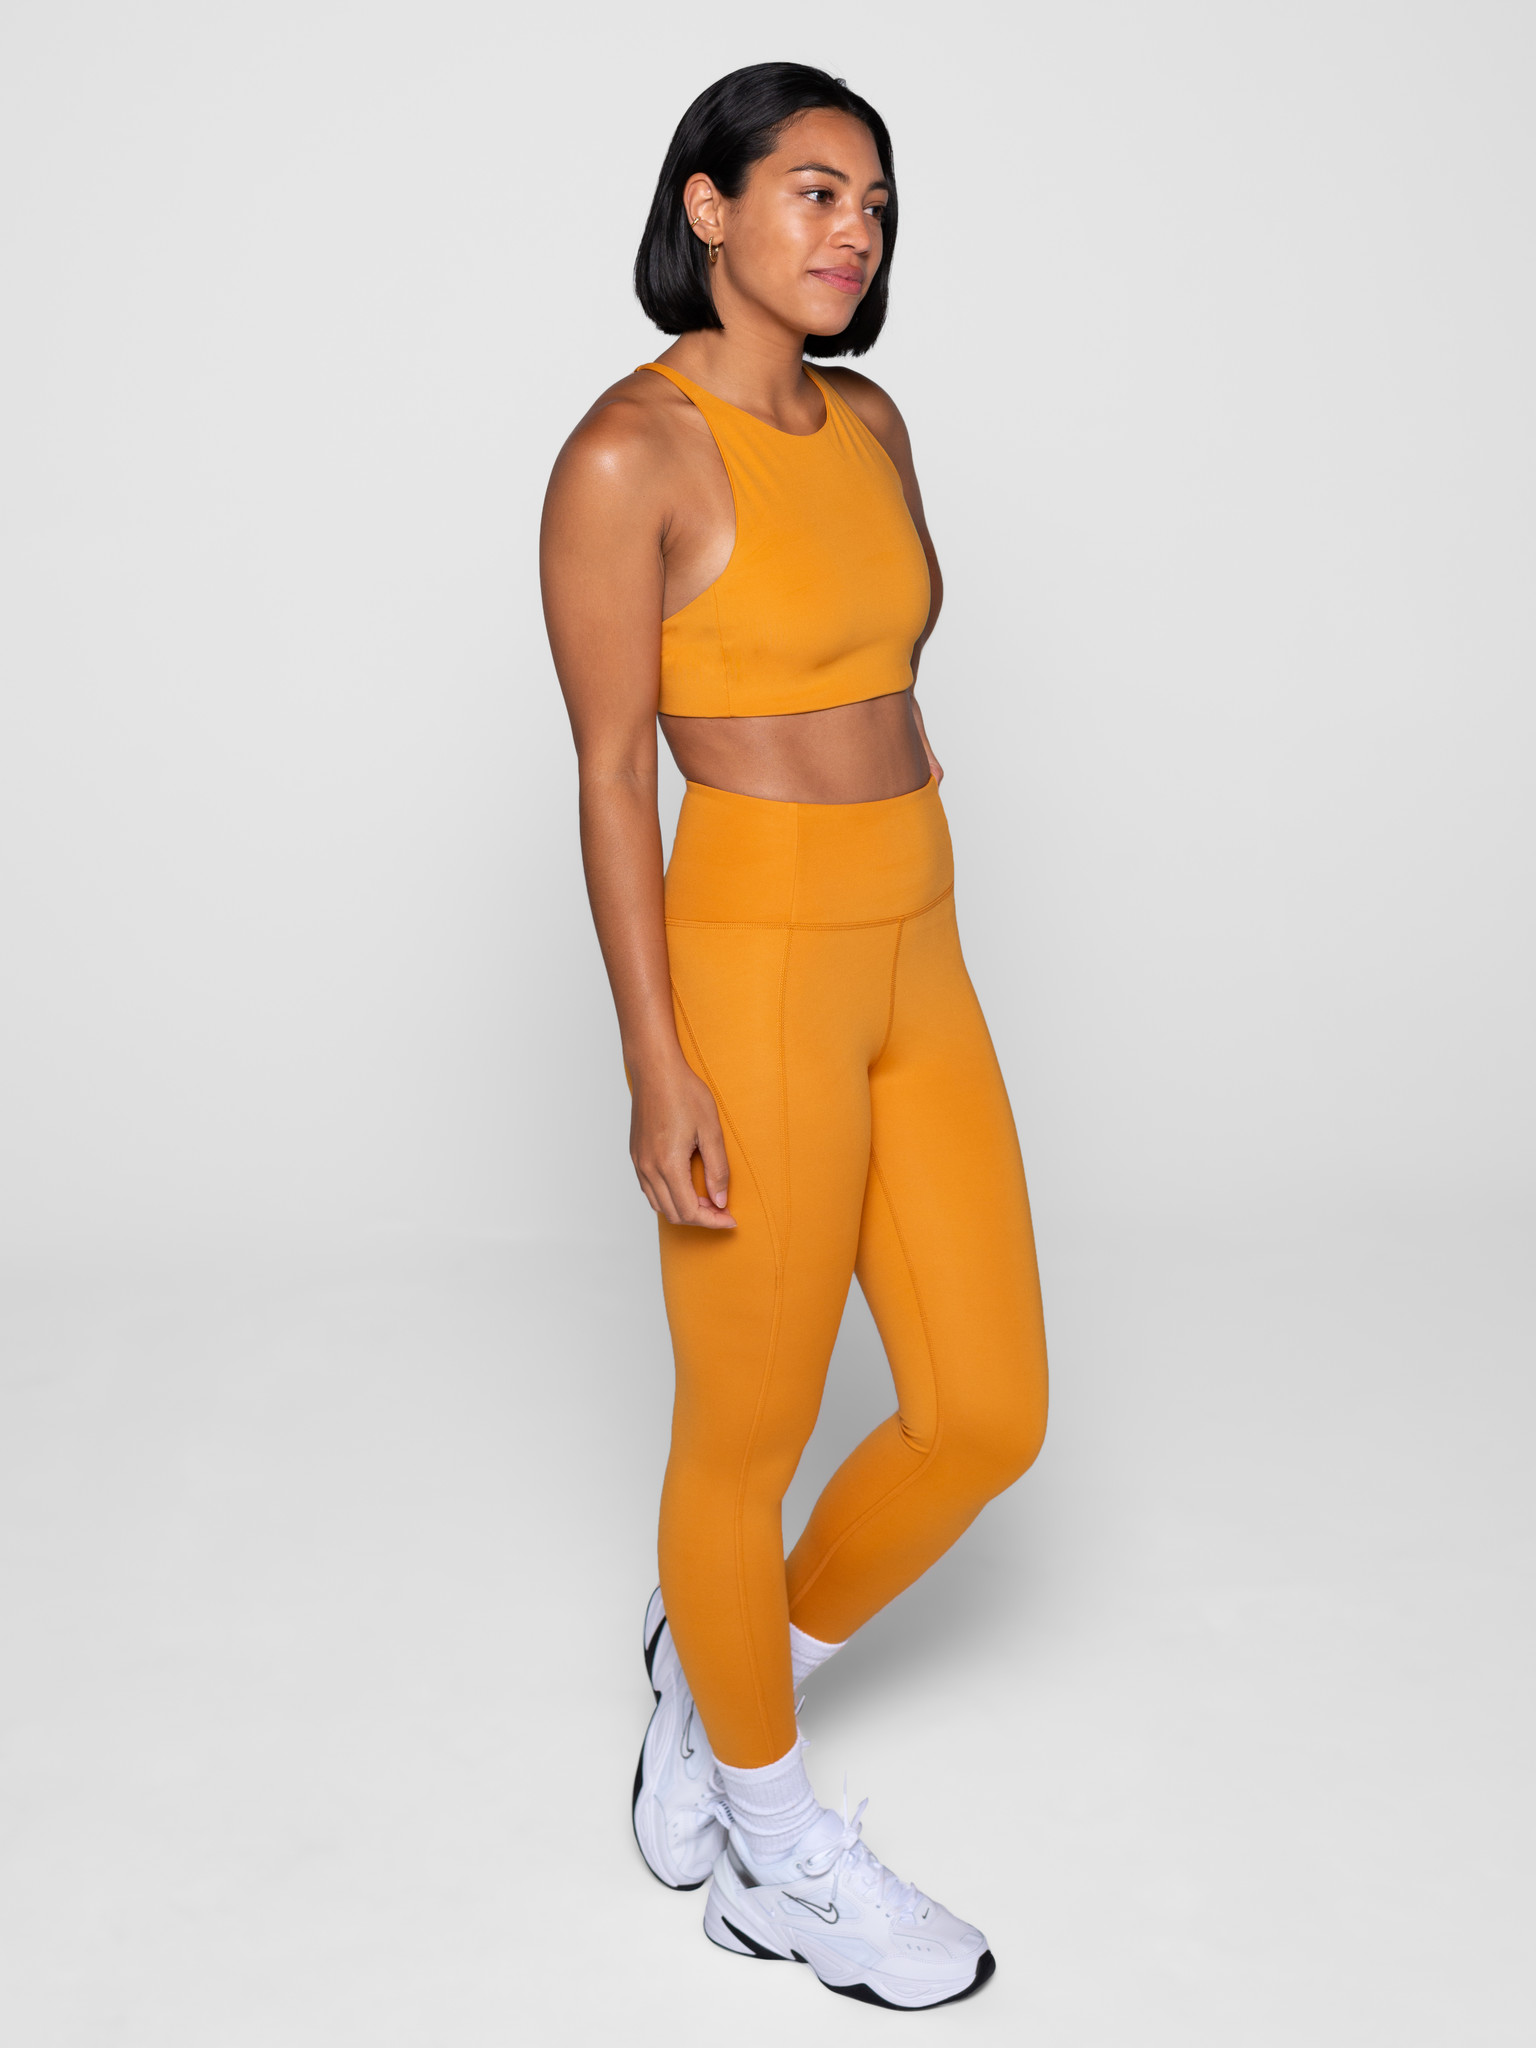 girlfriend collective, Pants & Jumpsuits, Girlfriend Collective  Compressive High Rise Legging